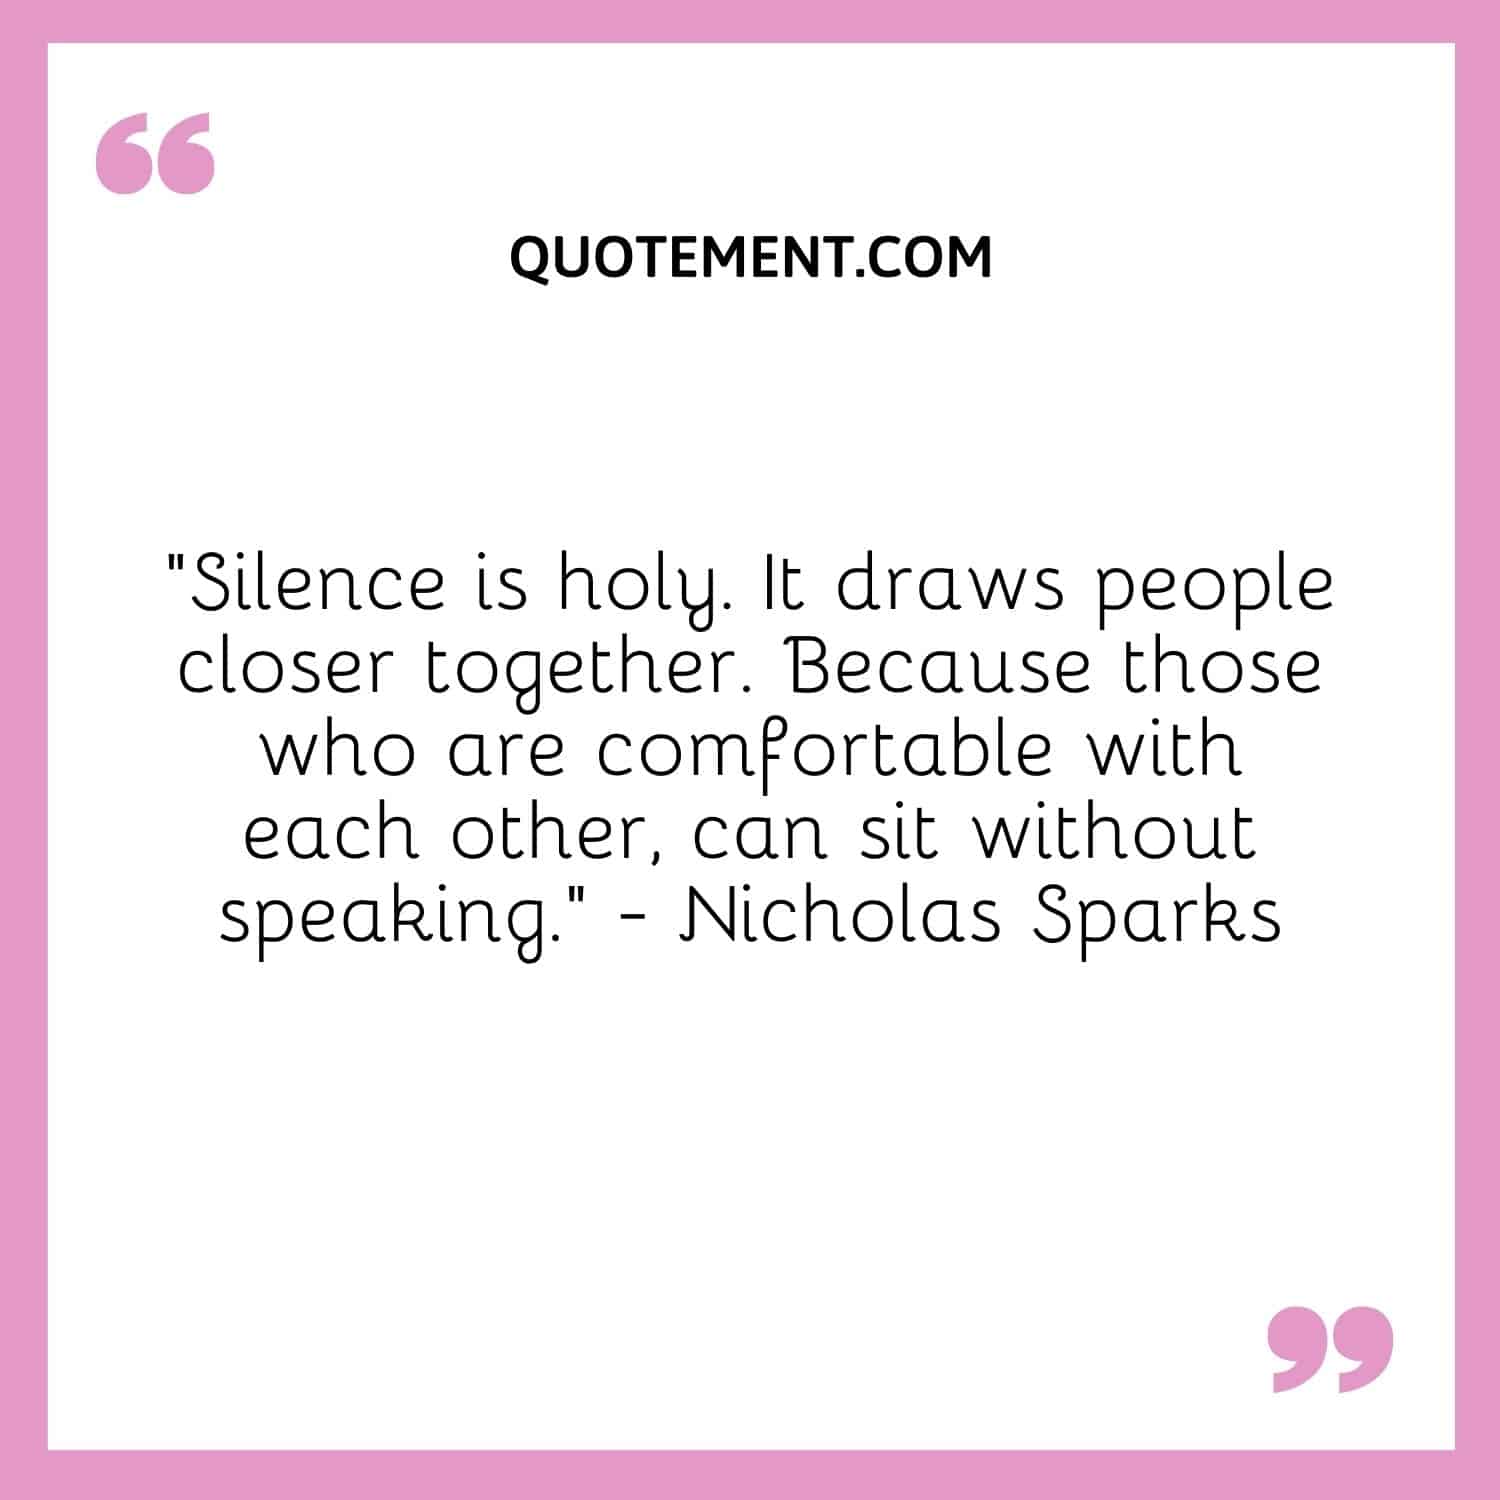 “Silence is holy. It draws people closer together. Because those who are comfortable with each other, can sit without speaking.” — Nicholas Sparks